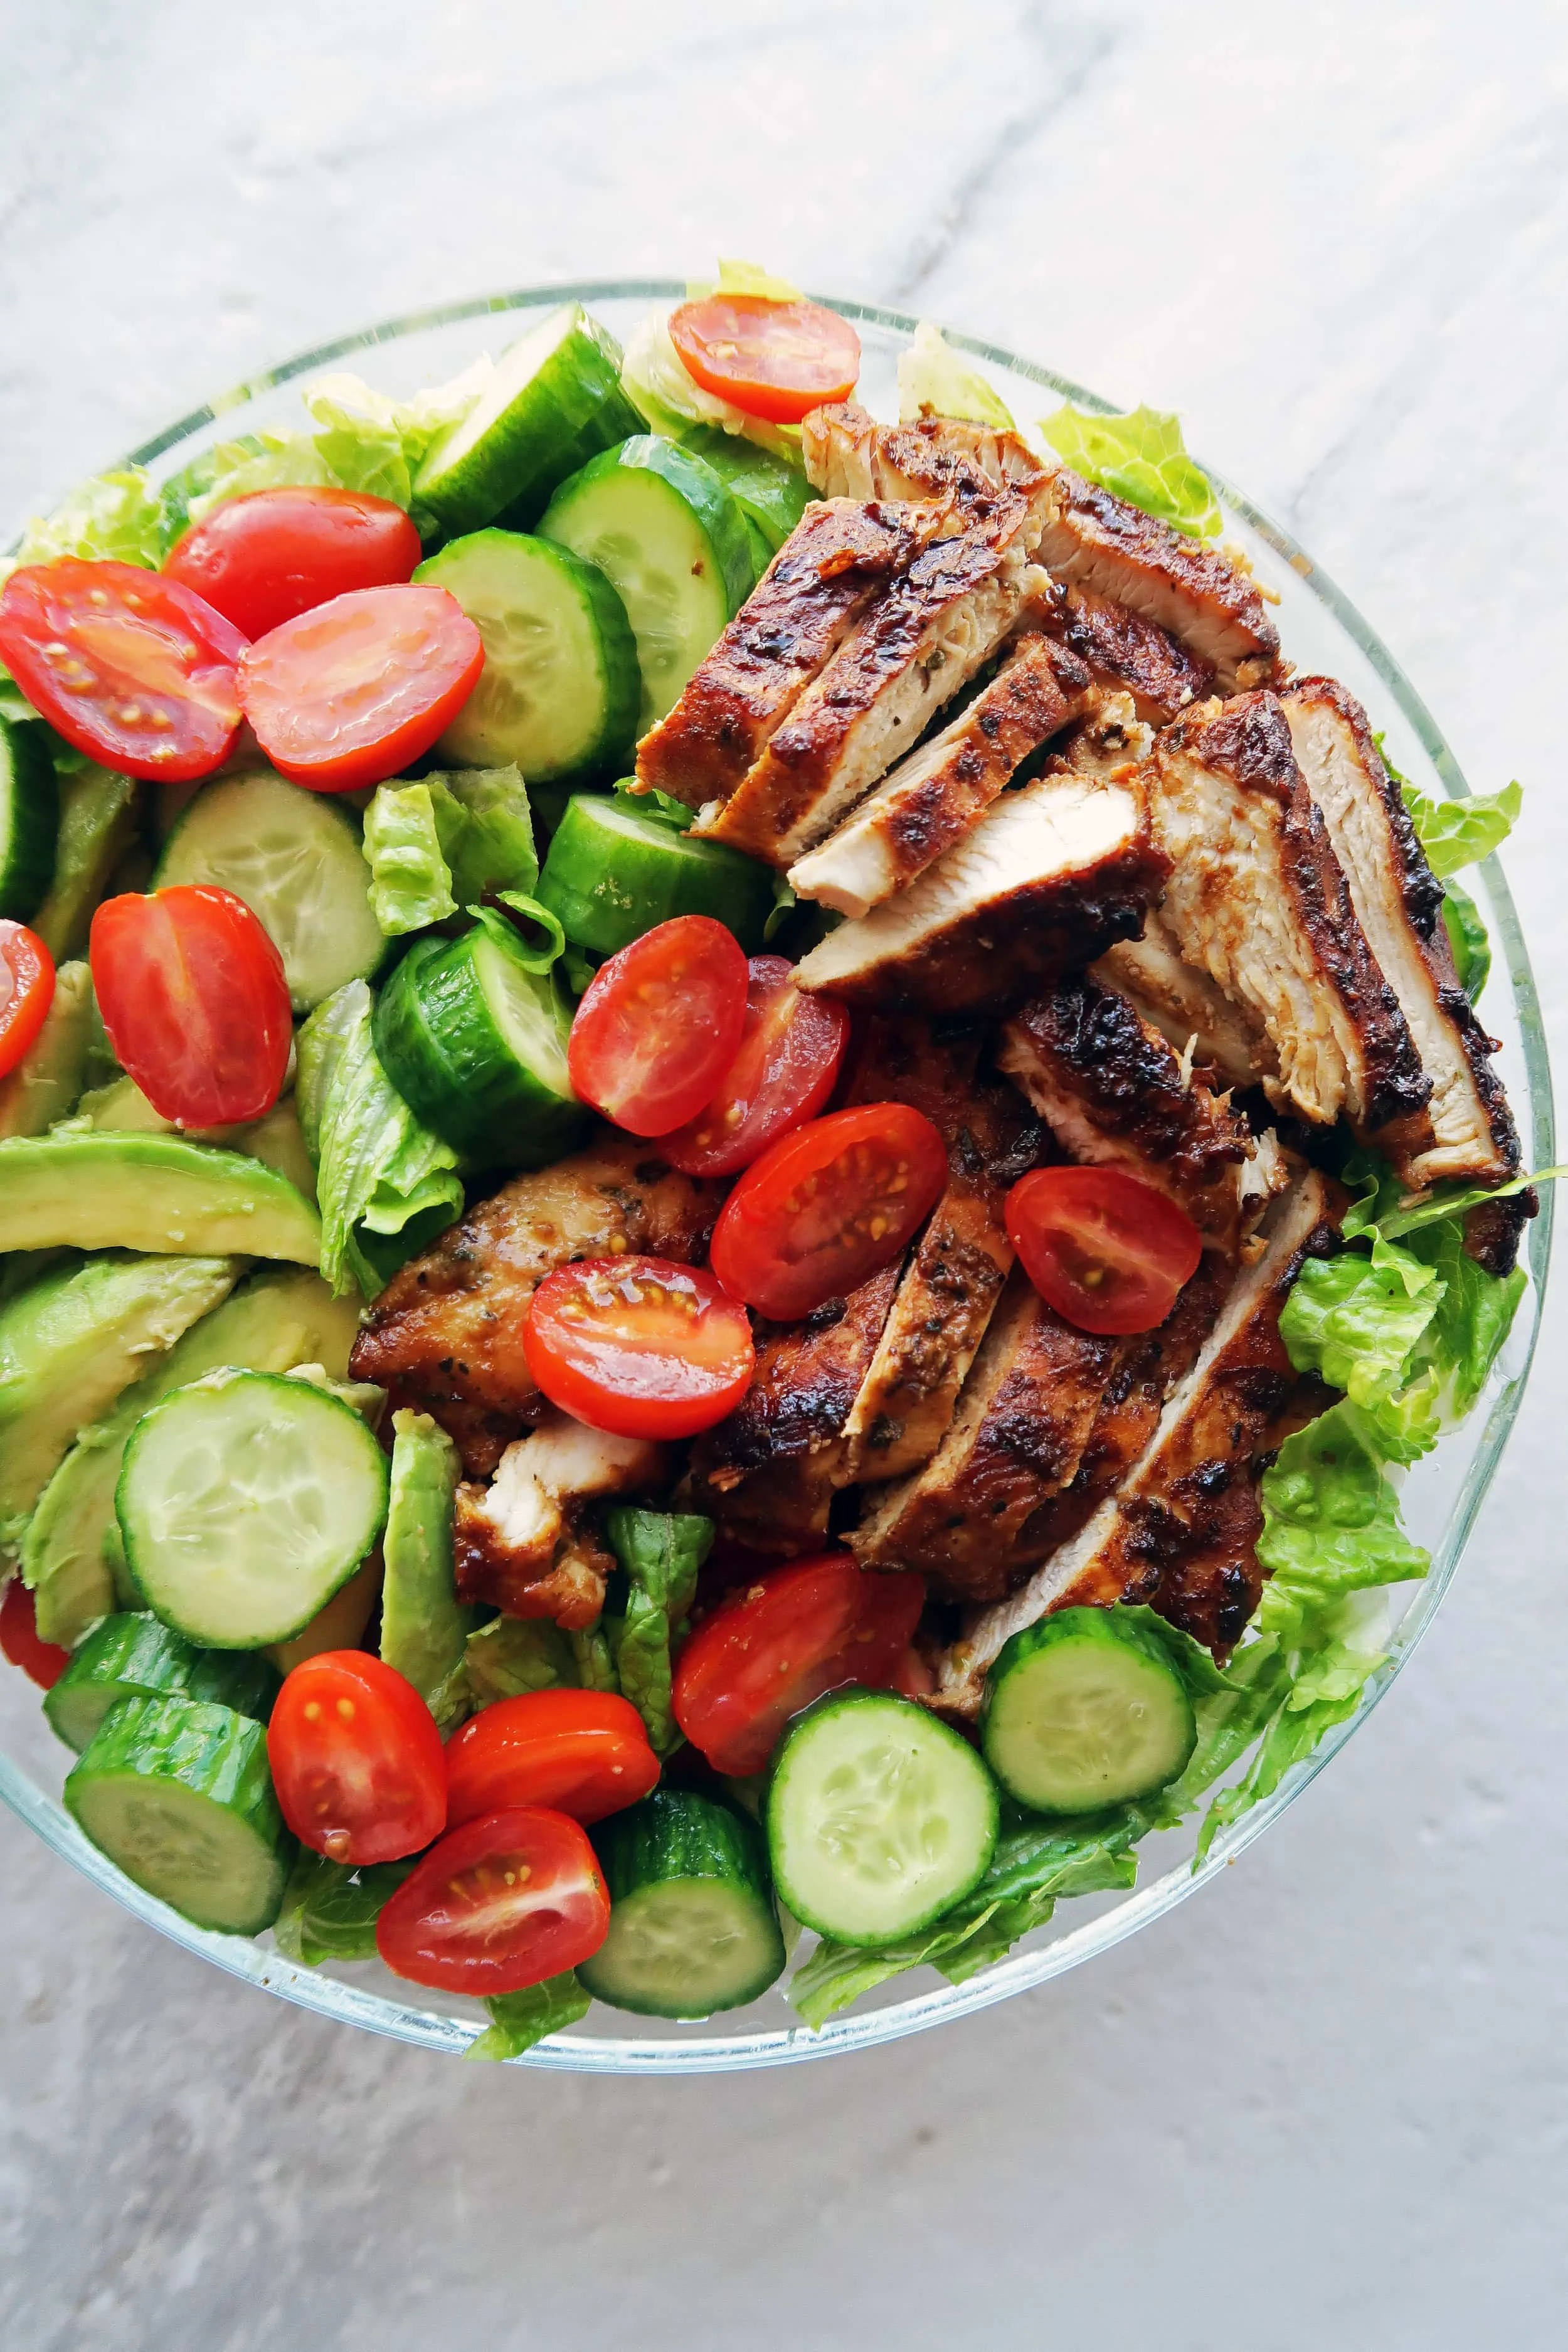 Chopped lettuce, tomatoes, cucumbers, avocado, and sliced honey mustard chicken breasts in a large bowl.